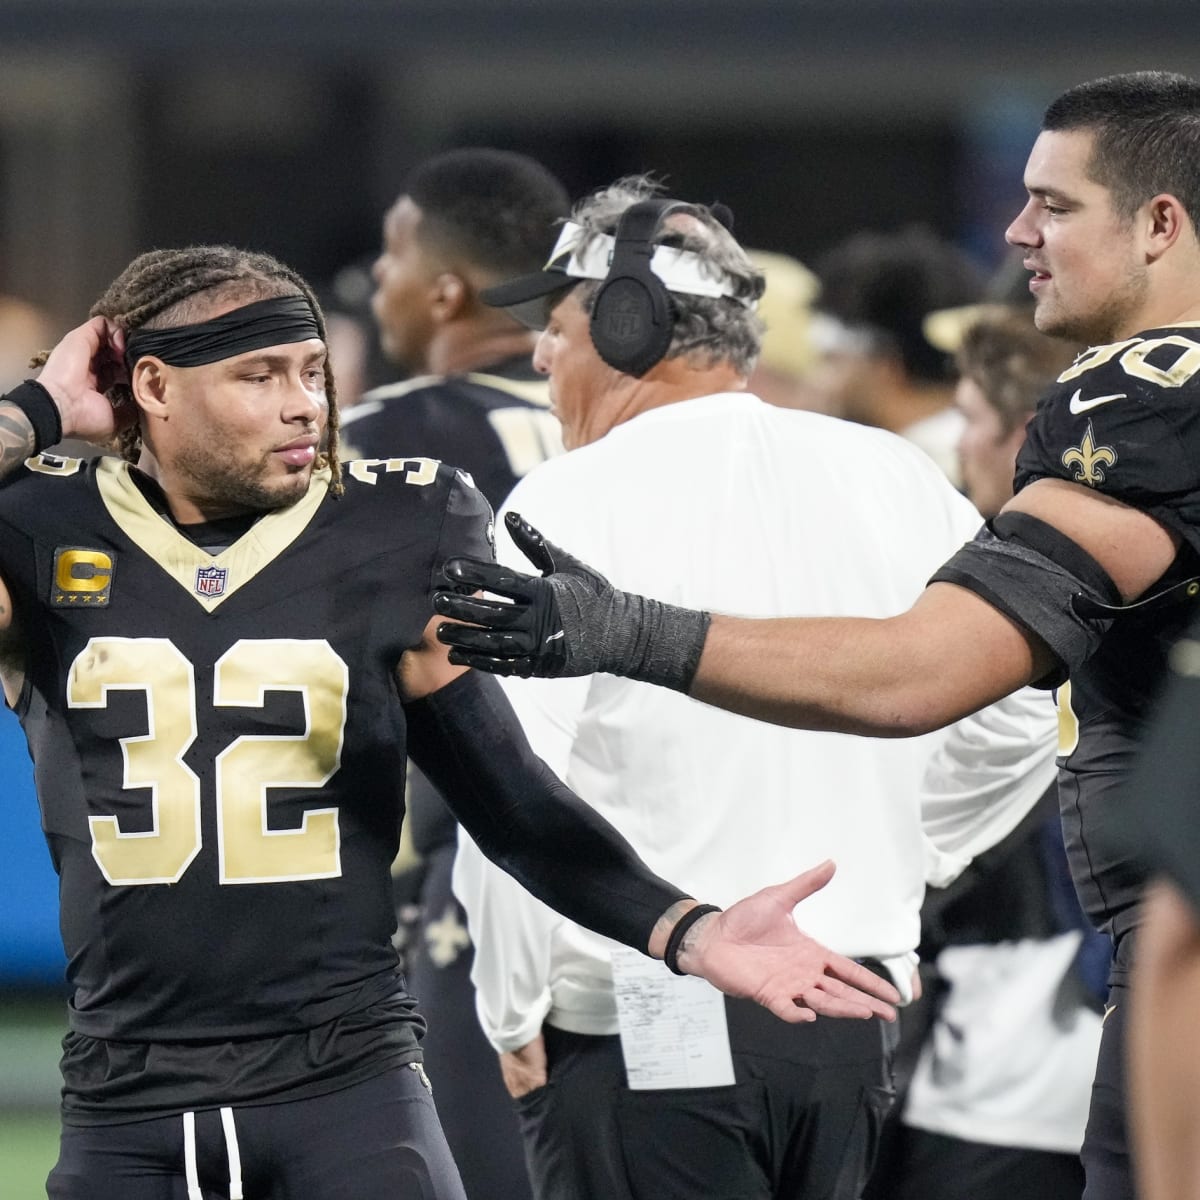 How to watch, stream the New Orleans Saints' Week 1 game vs. Packers